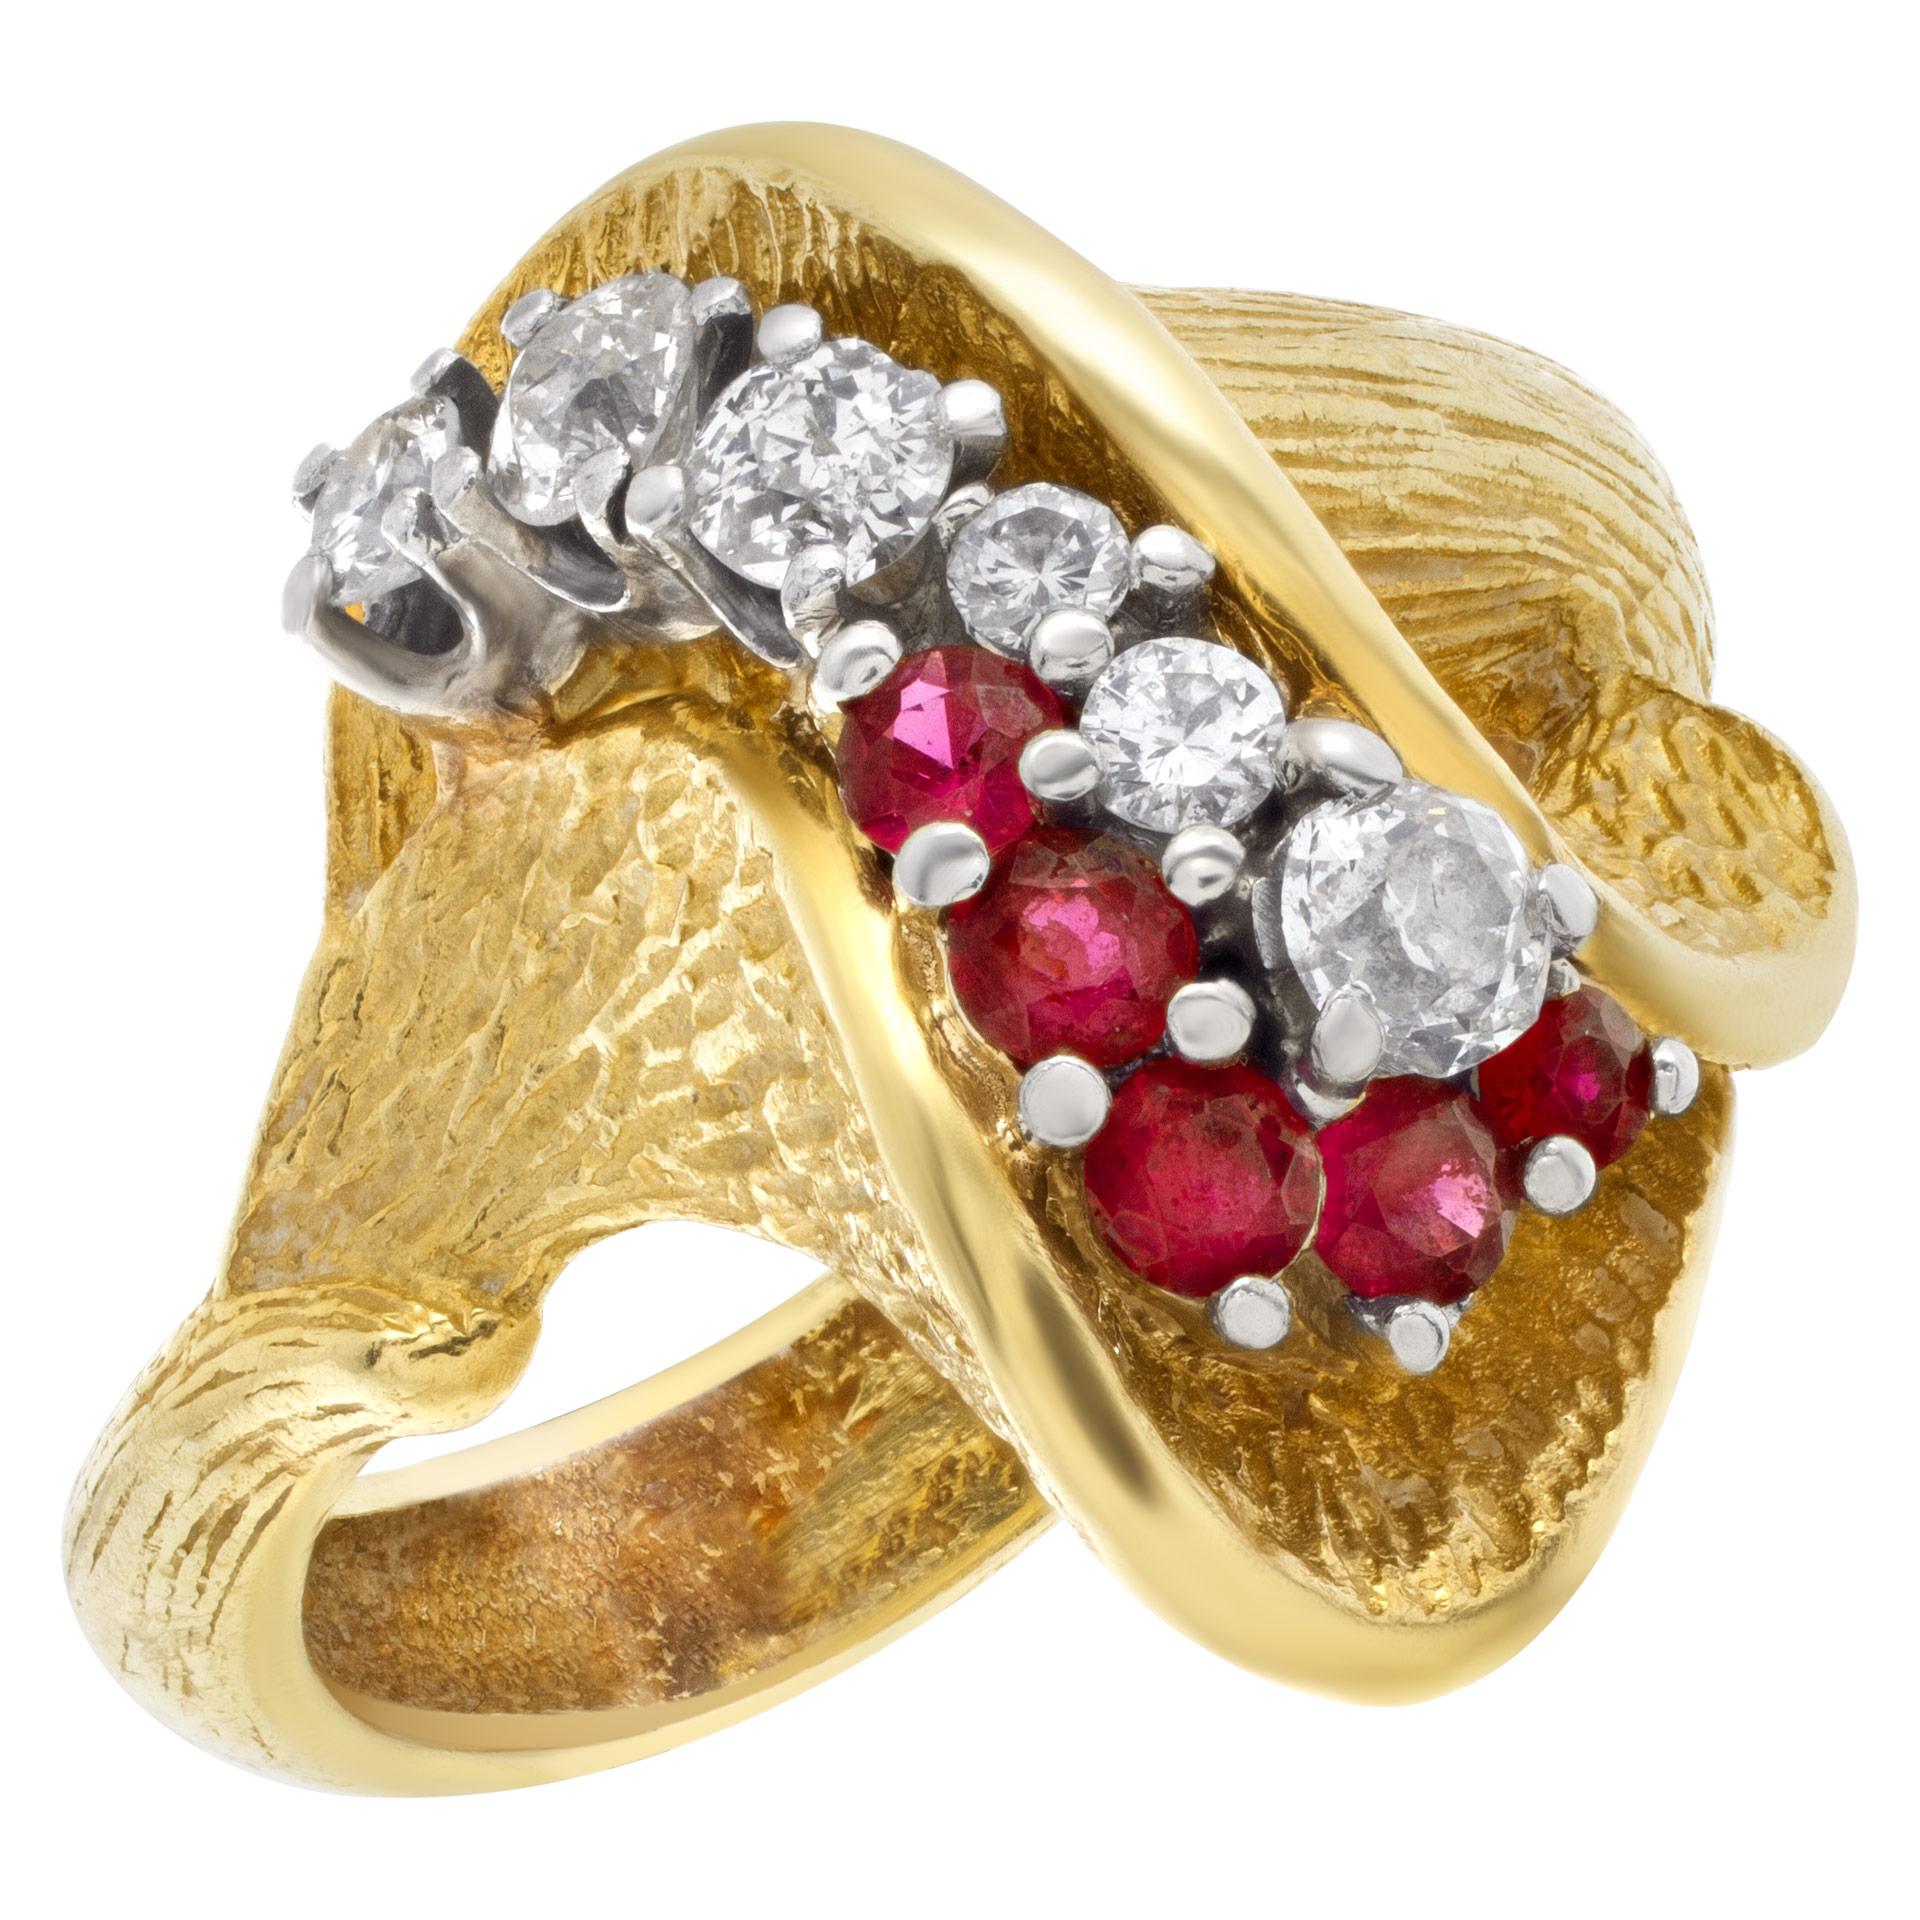 Abstract tulip design ruby & diamond ring in 18k yellow gold. Size: 9.5. Ring length: 18.4mm & width: 22mm.

This Diamond/Ruby ring is currently size 9.5 and some items can be sized up or down, please ask! It weighs 9.5 pennyweights and is 18k.